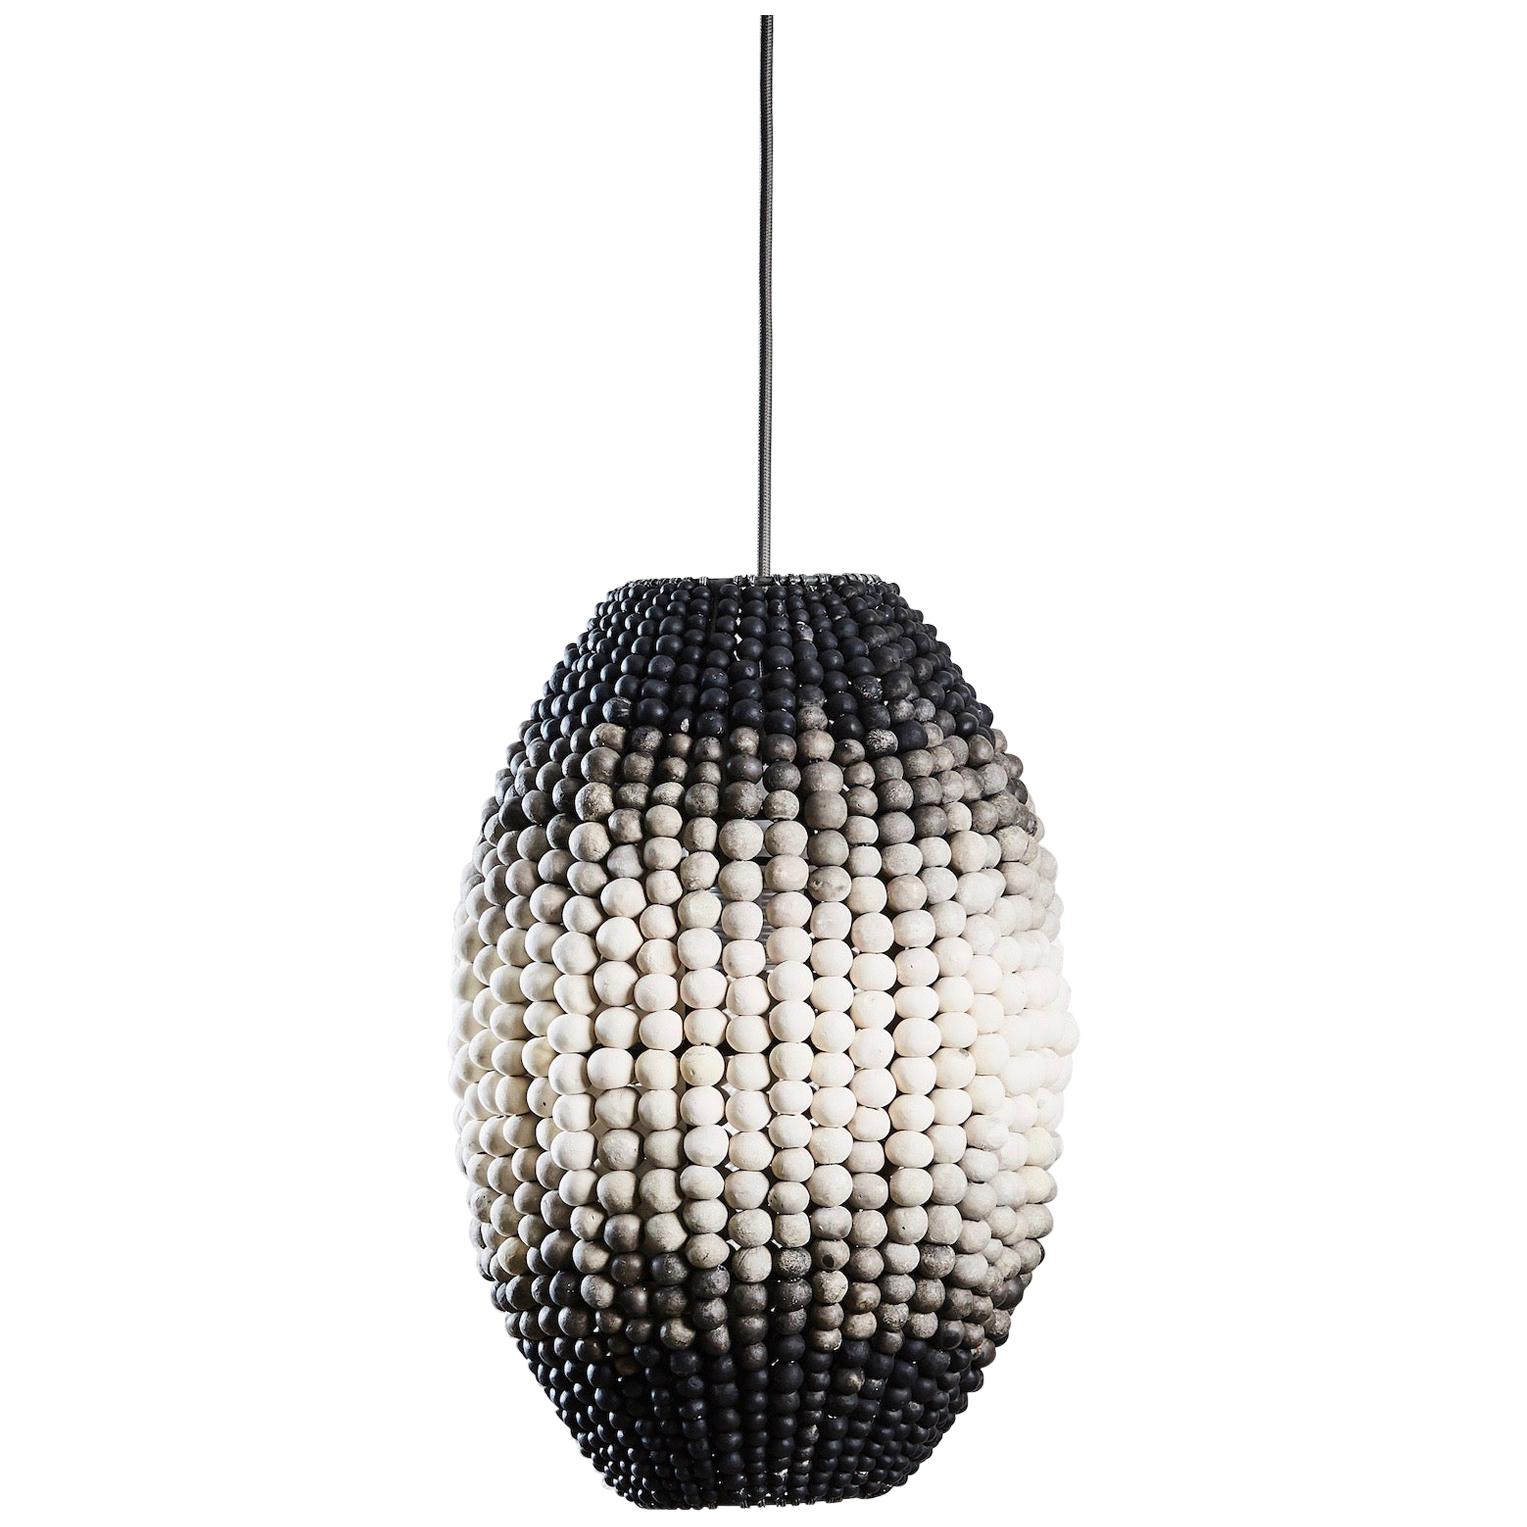 Statement clay beaded lighting, that can be suspended as a single, or in a cluster for maximum impact.

The klaylife barrel pendant has been specially created for those who don’t have an enormous space but still want pendant lighting that packs a